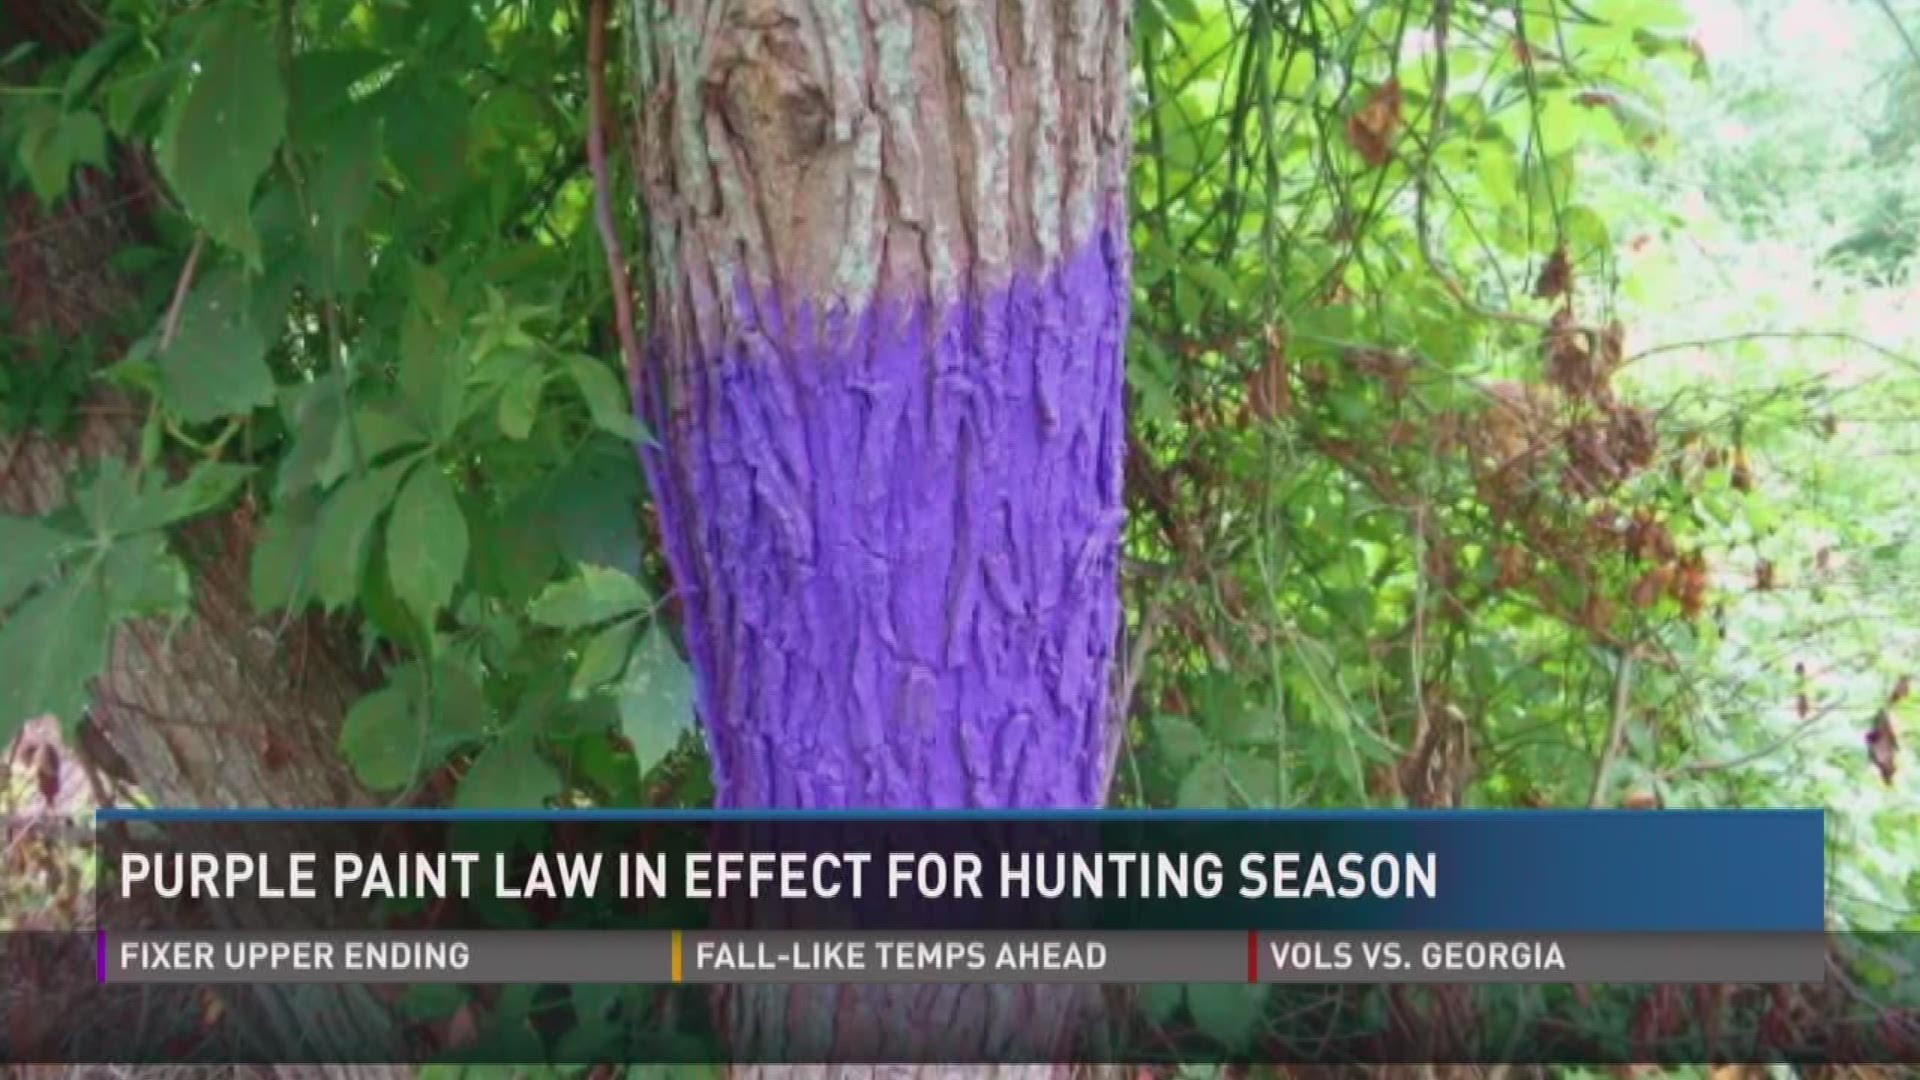 The purple paint law is in effect for this hunting season. Trespassing is a Class C Misdemeanor in the State of Tennessee which can result in a $50 dollar fine or up to 30 days in jail.